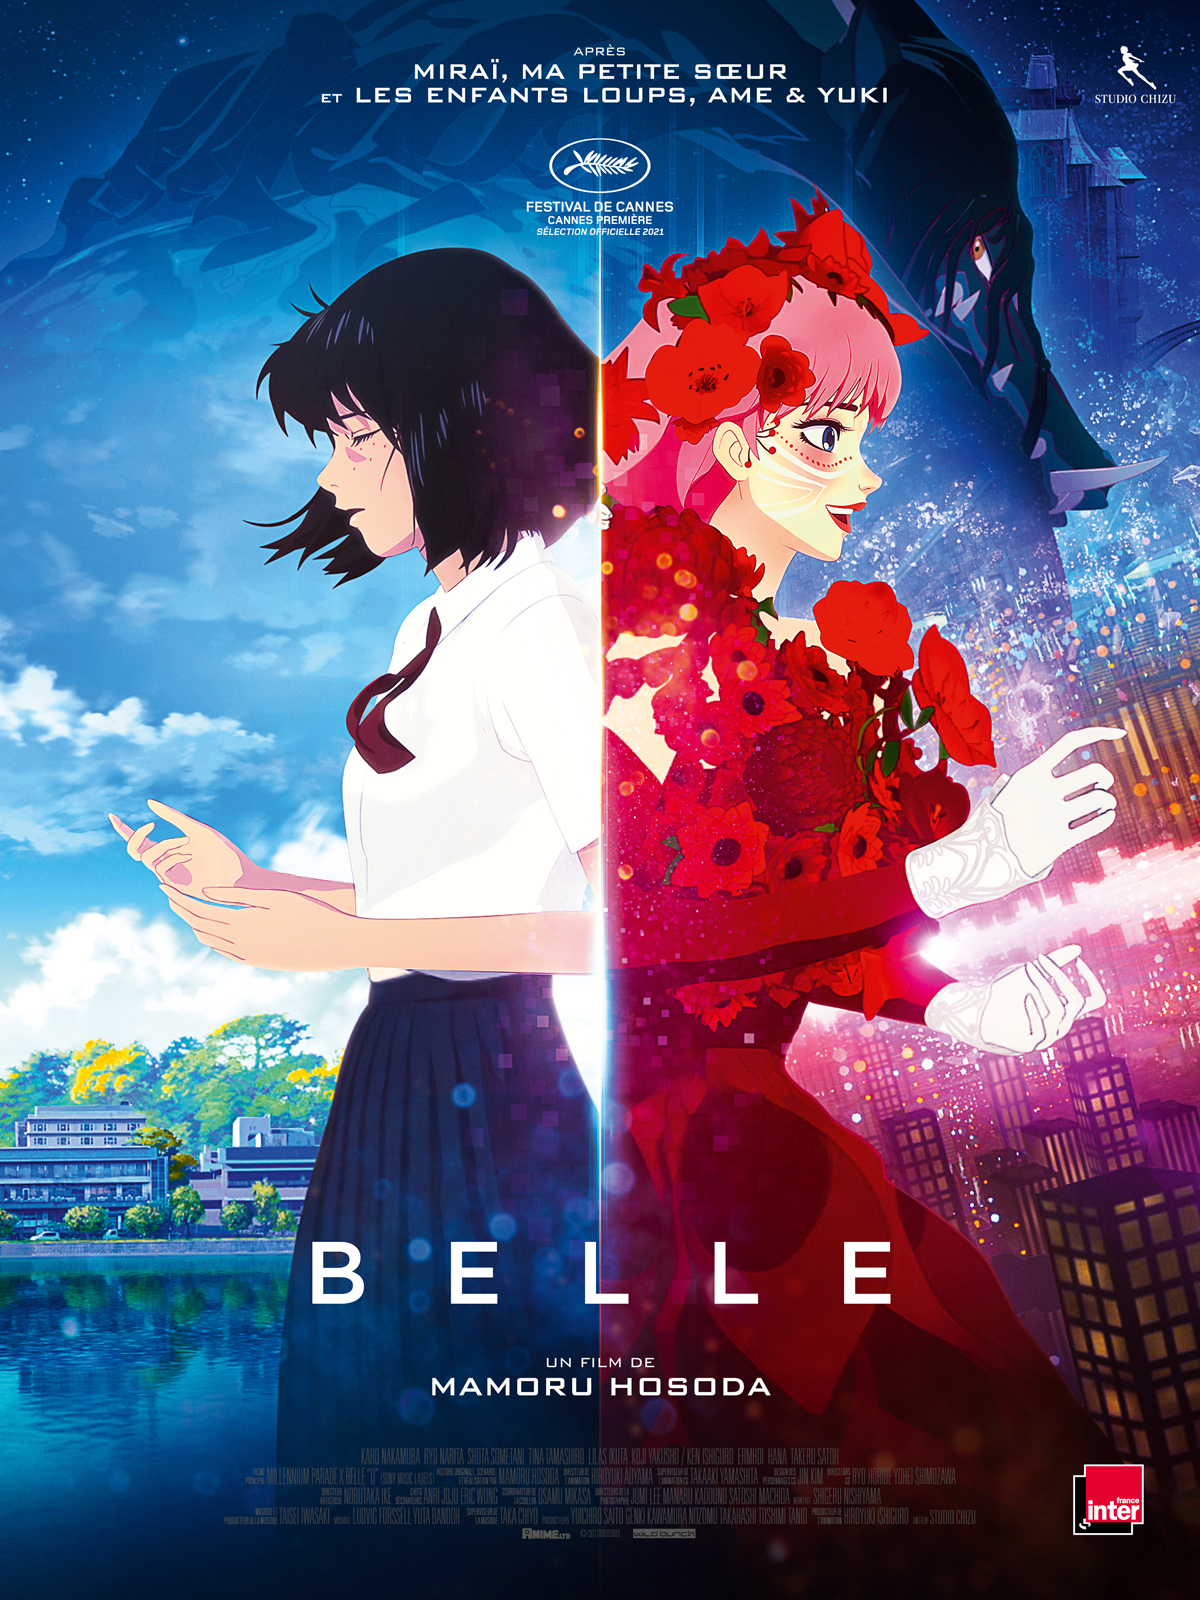 Mamoru Hosodas Belle Celebrates Debut With New Poster